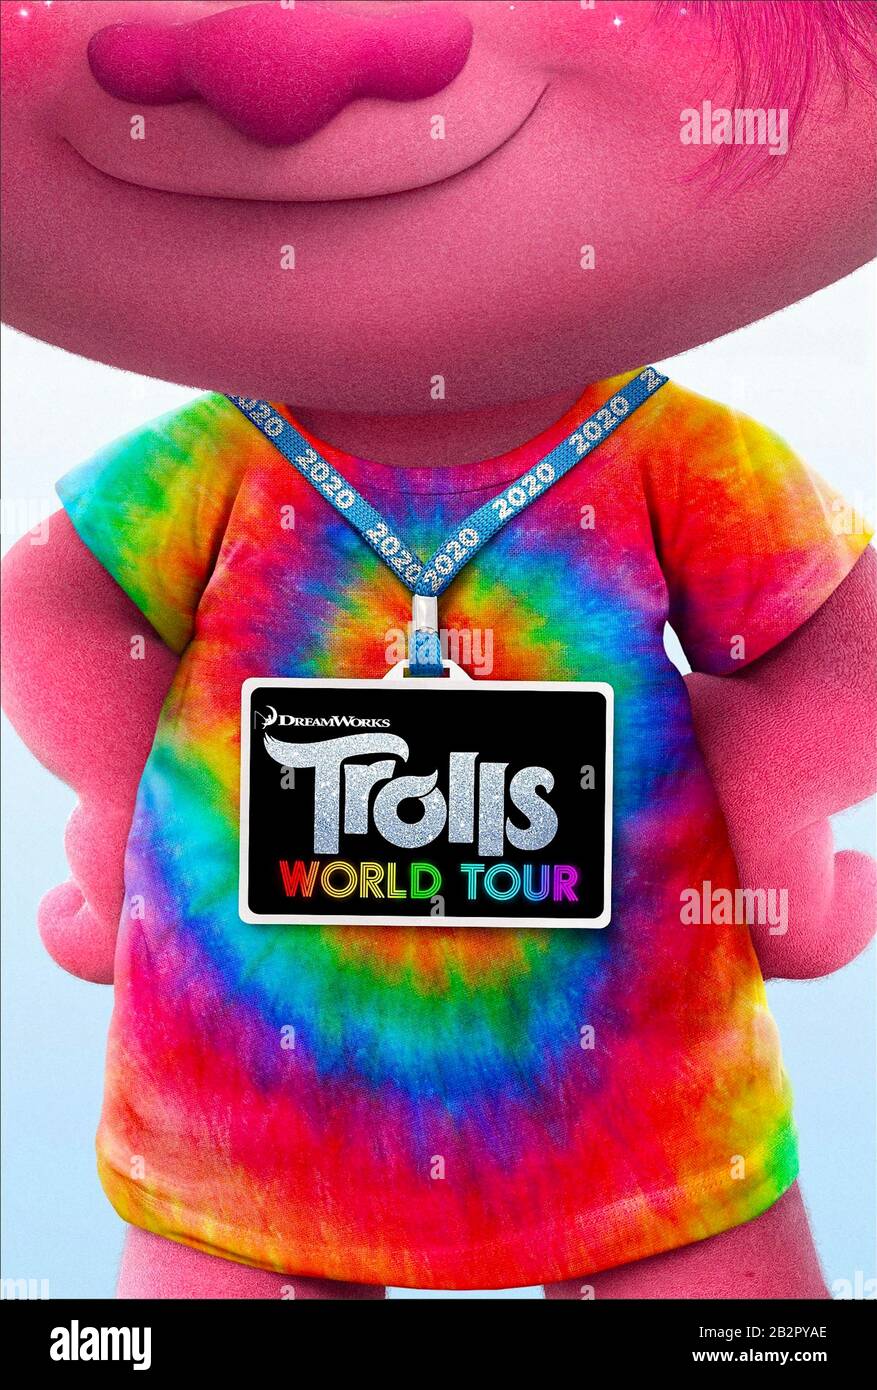 Trolls World Tour (2020) directed by Walt Dohrn and David P. Smith and starring Justin Timberlake, James Corden, Ozzy Osbourne and Mary J. Blige. The Troll tribe into rock music decide to tour the lands of trolls who prefer funk, country, techno, classical and Pop music. Stock Photo